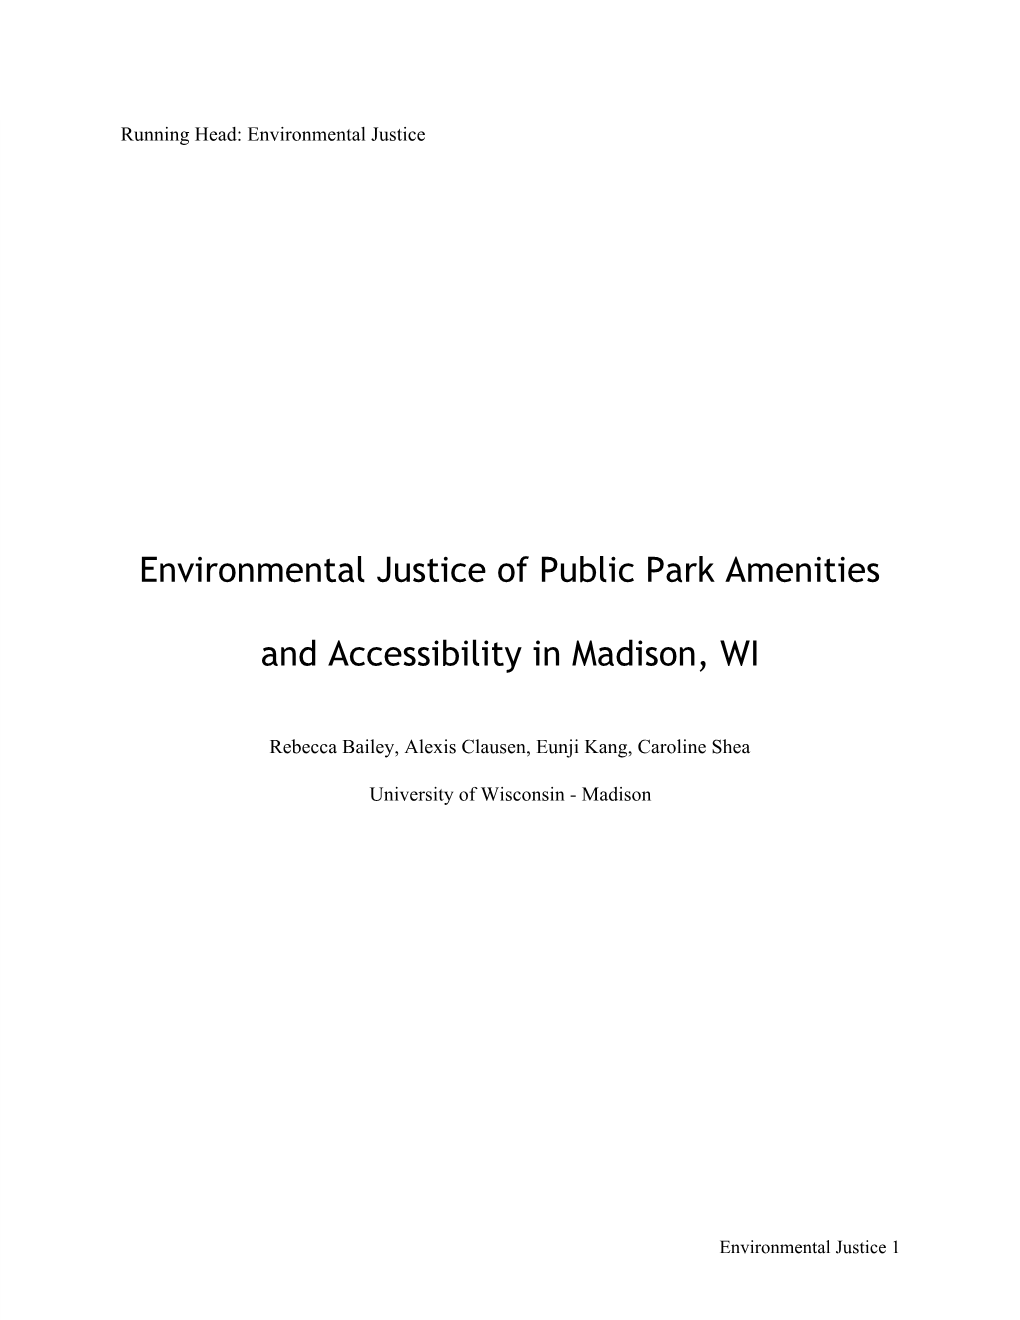 Environmental Justice of Public Park Amenities and Accessibility in Madison, WI